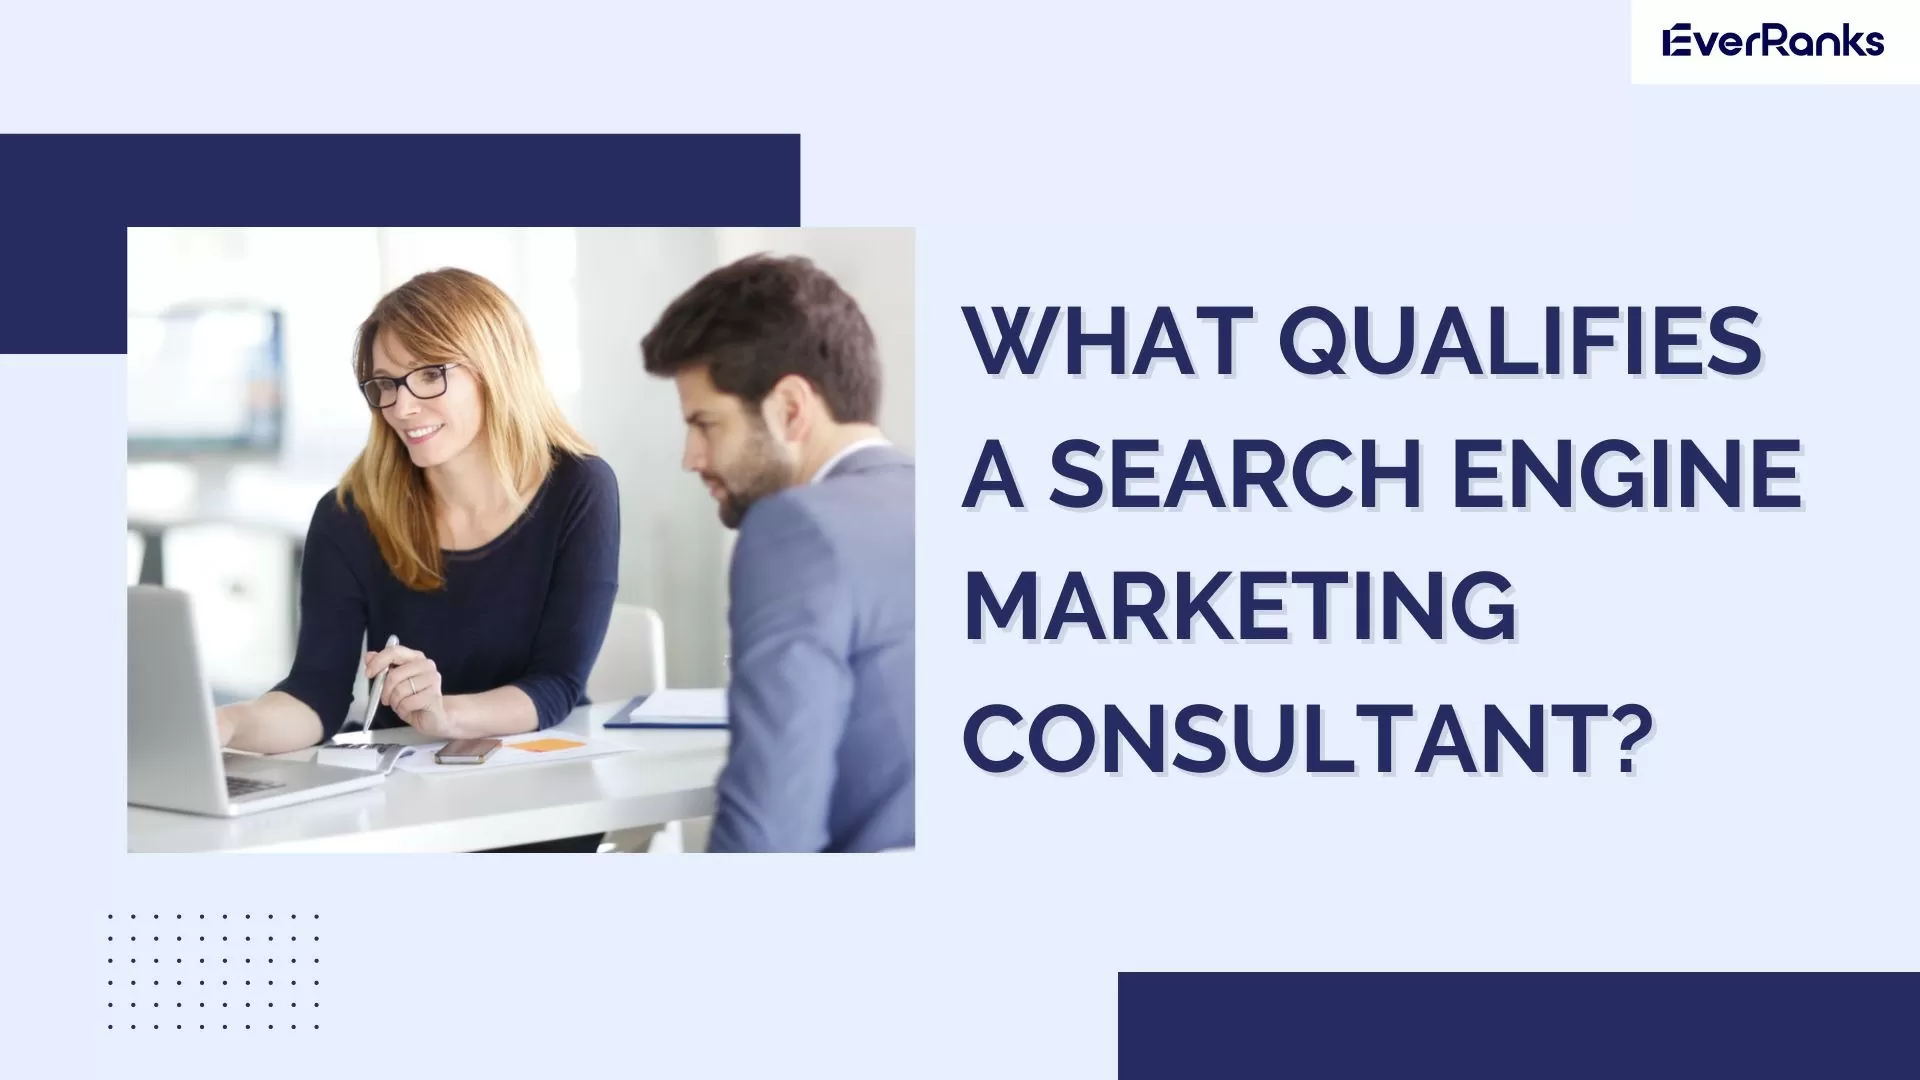 What Qualifies A Search Engine Marketing Consultant?